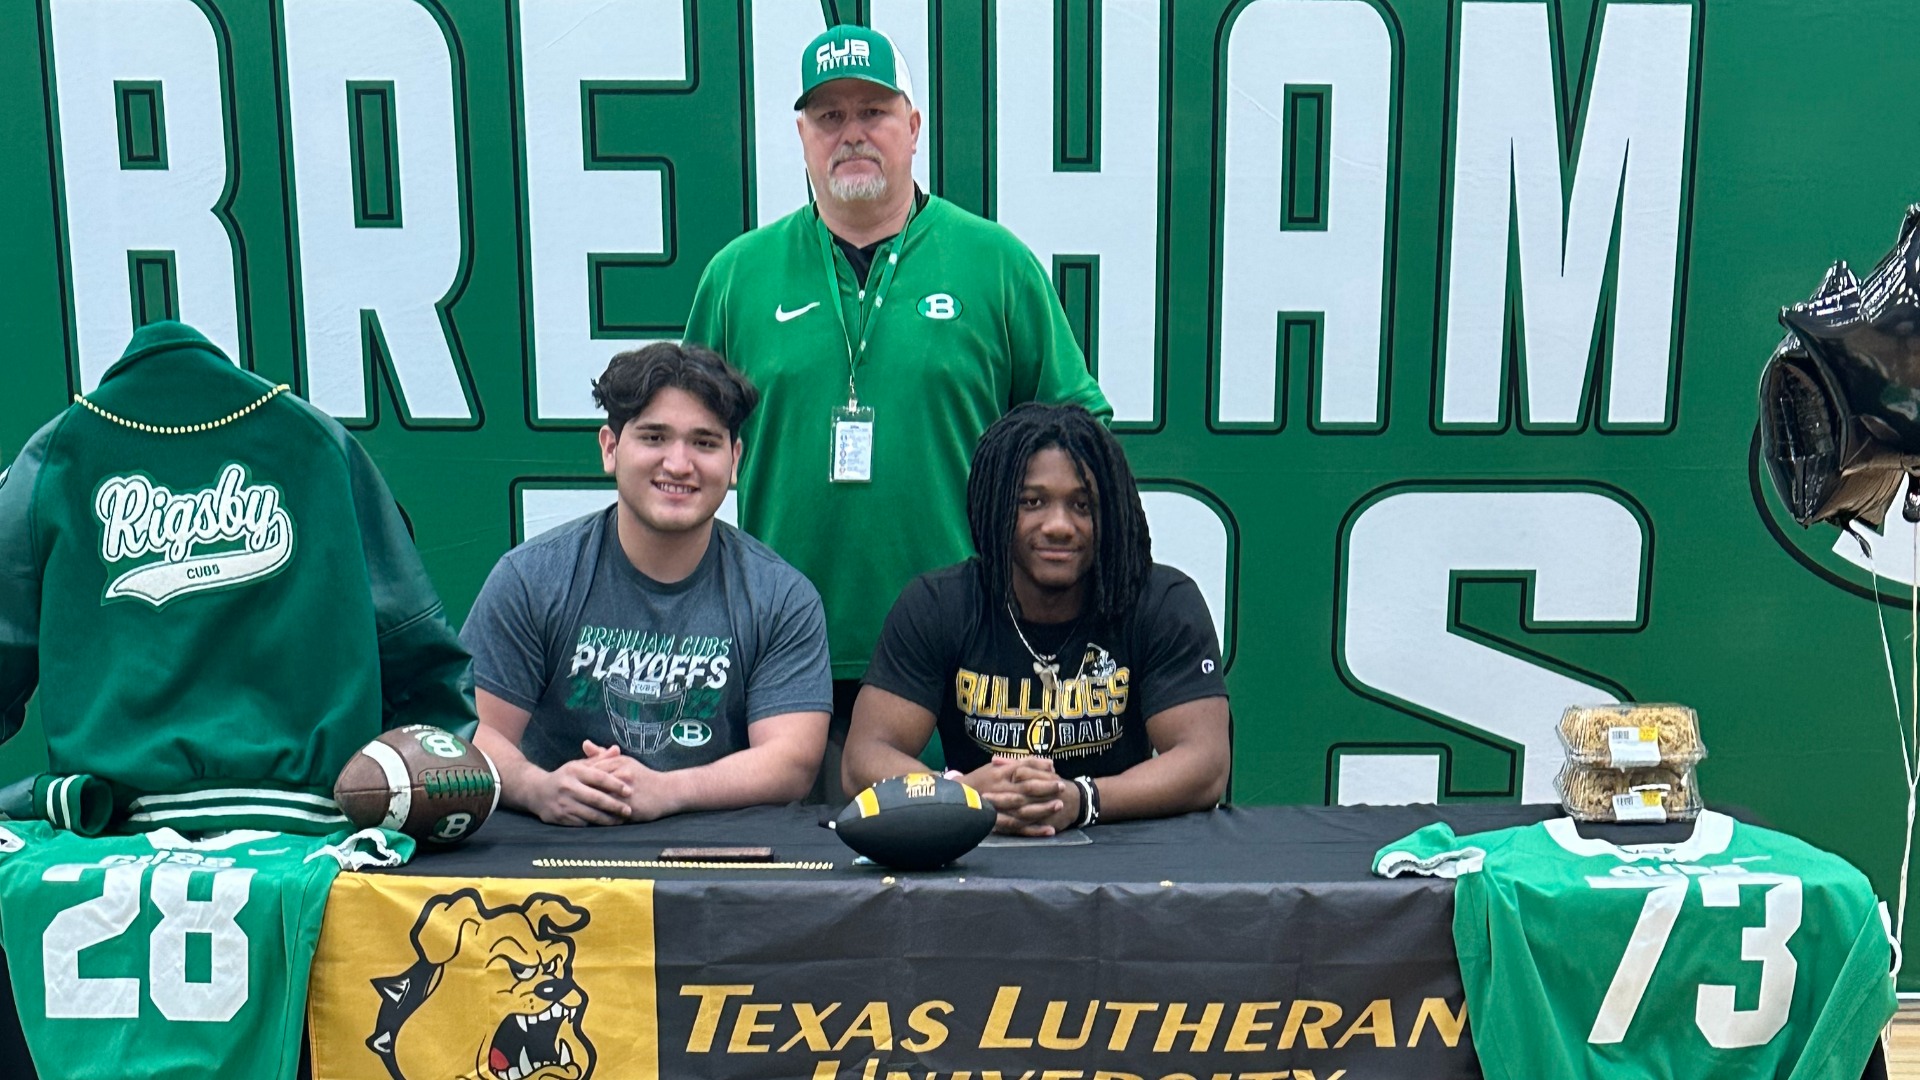 Slide 5 - Miguel Rodriguez, John Rigsby Sign with Texas Lutheran University